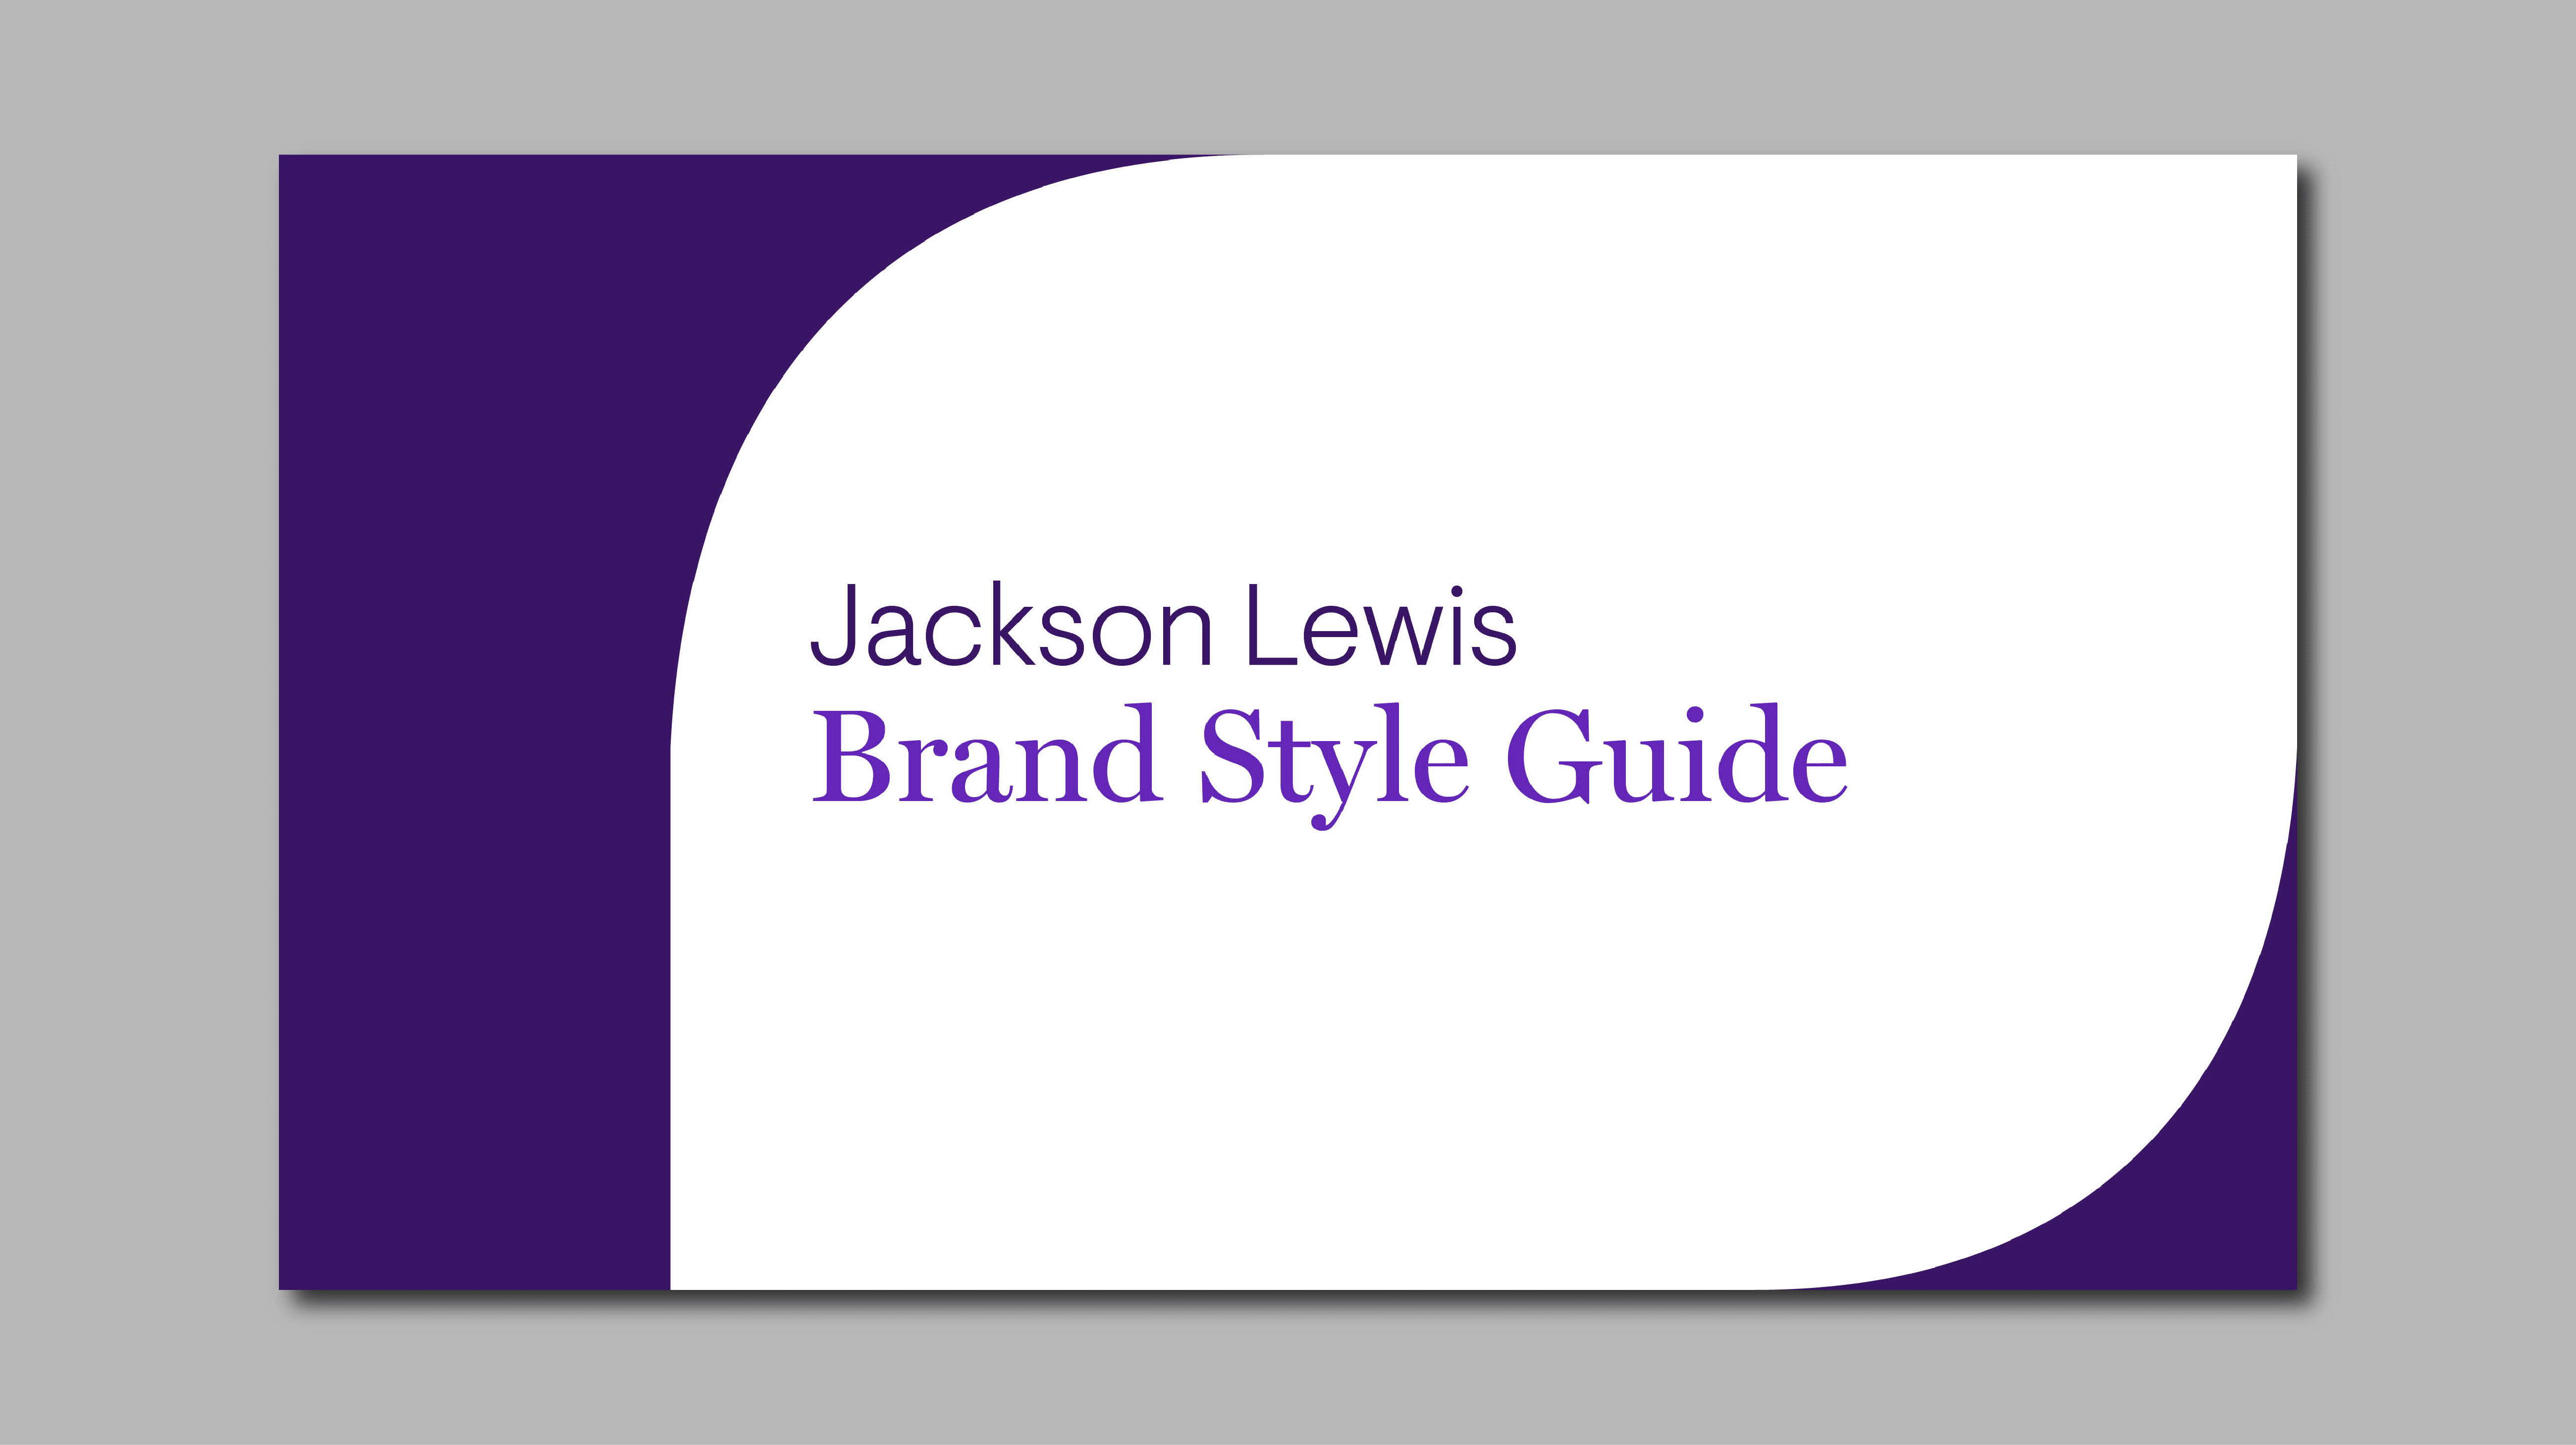 A animation flipping through the Jackson Lewis Style Guide